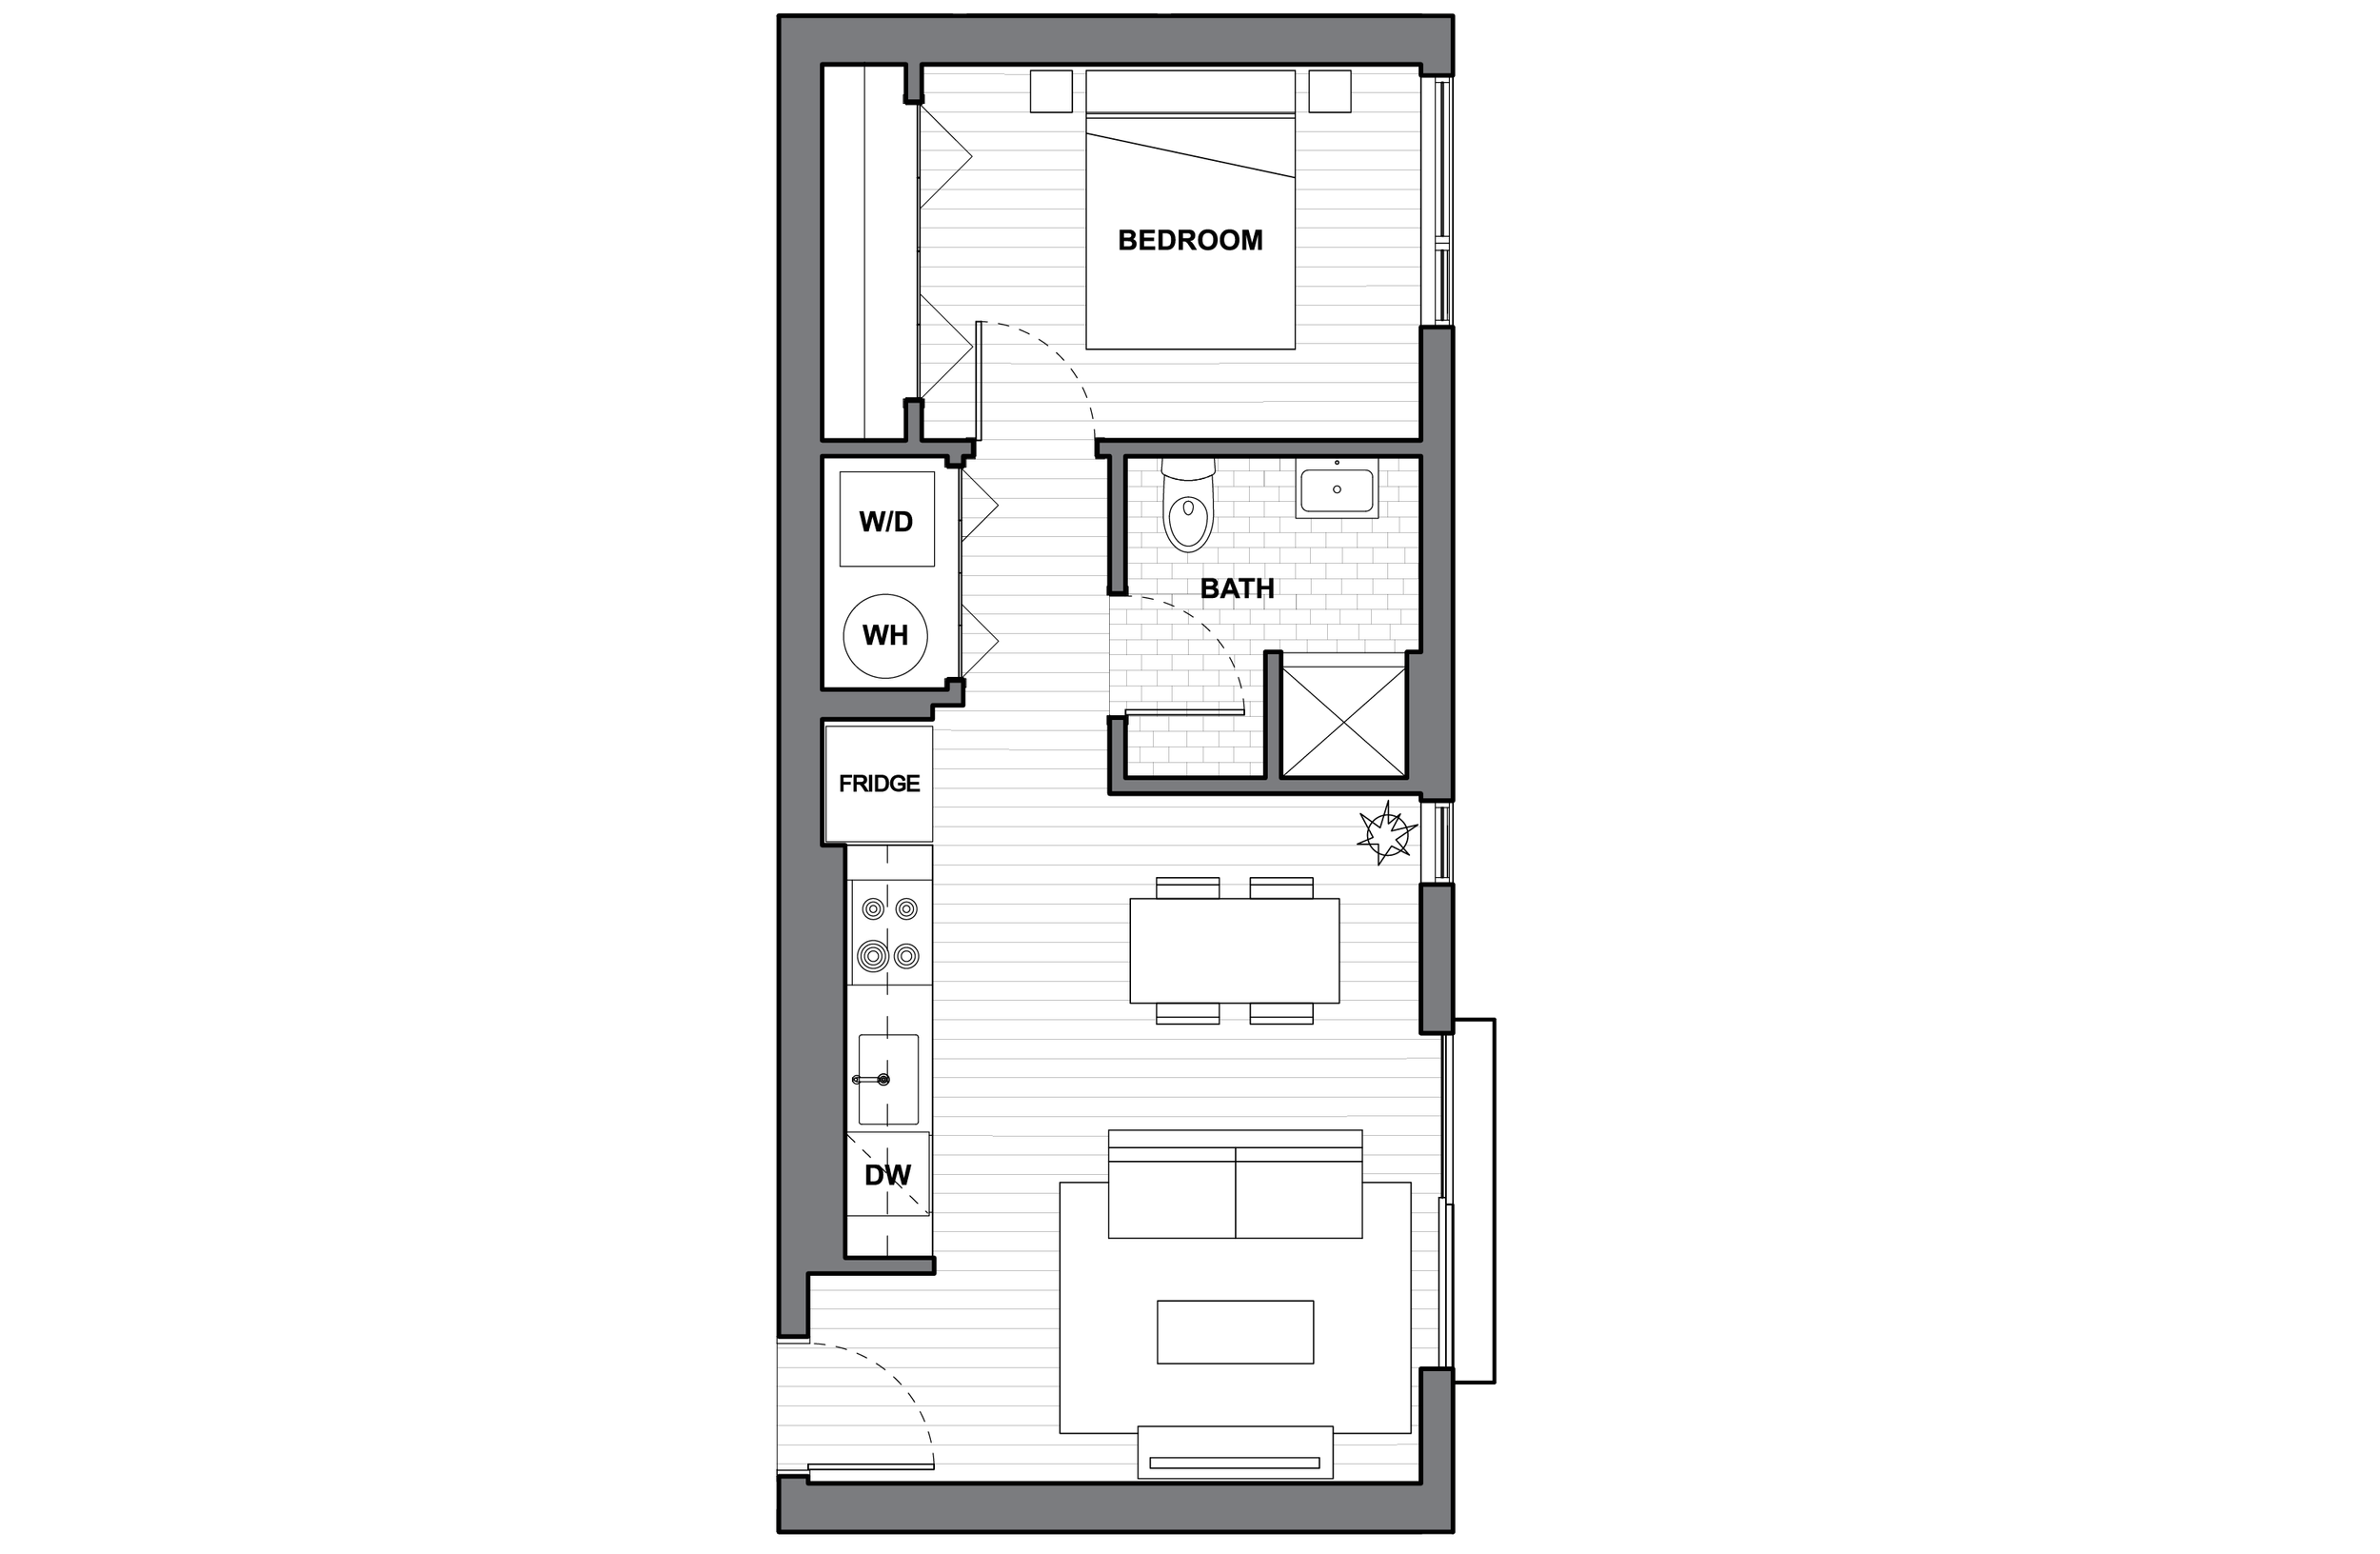   UNIT 201  1 BEDROOM / 1 BATH 545 SQUARE FEET   REQUEST INFORMATION / APPLY FOR THIS UNIT   